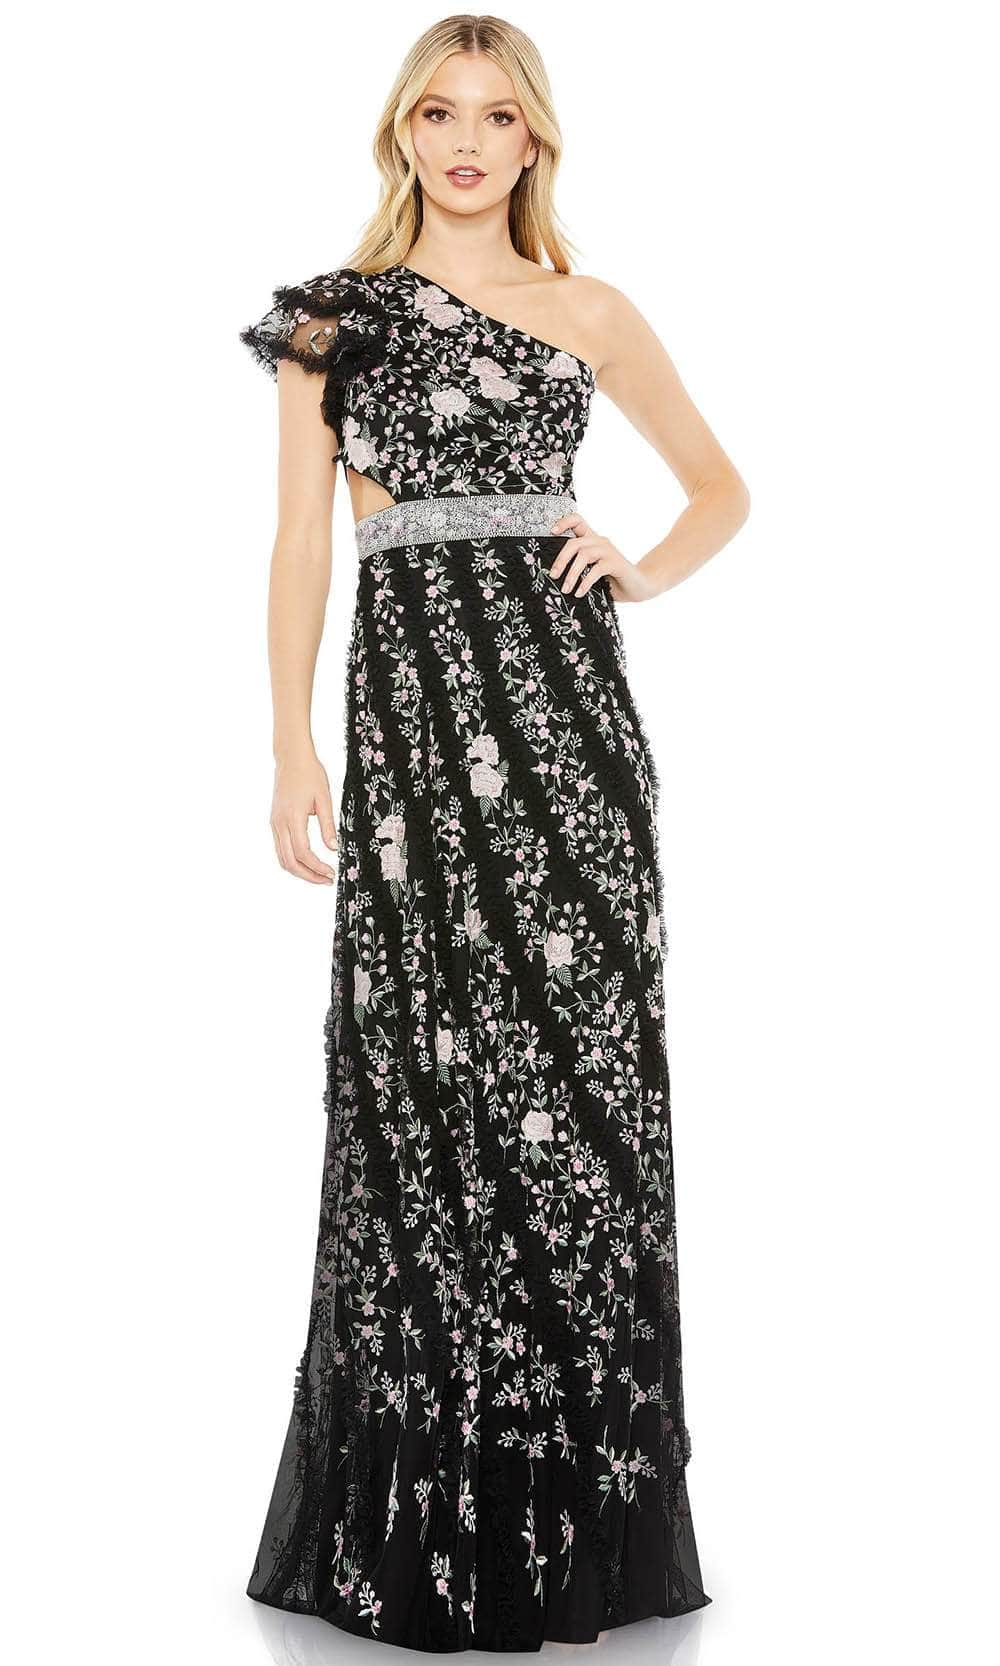 Mac Duggal 70160 - Floral Strappy Evening Dress
